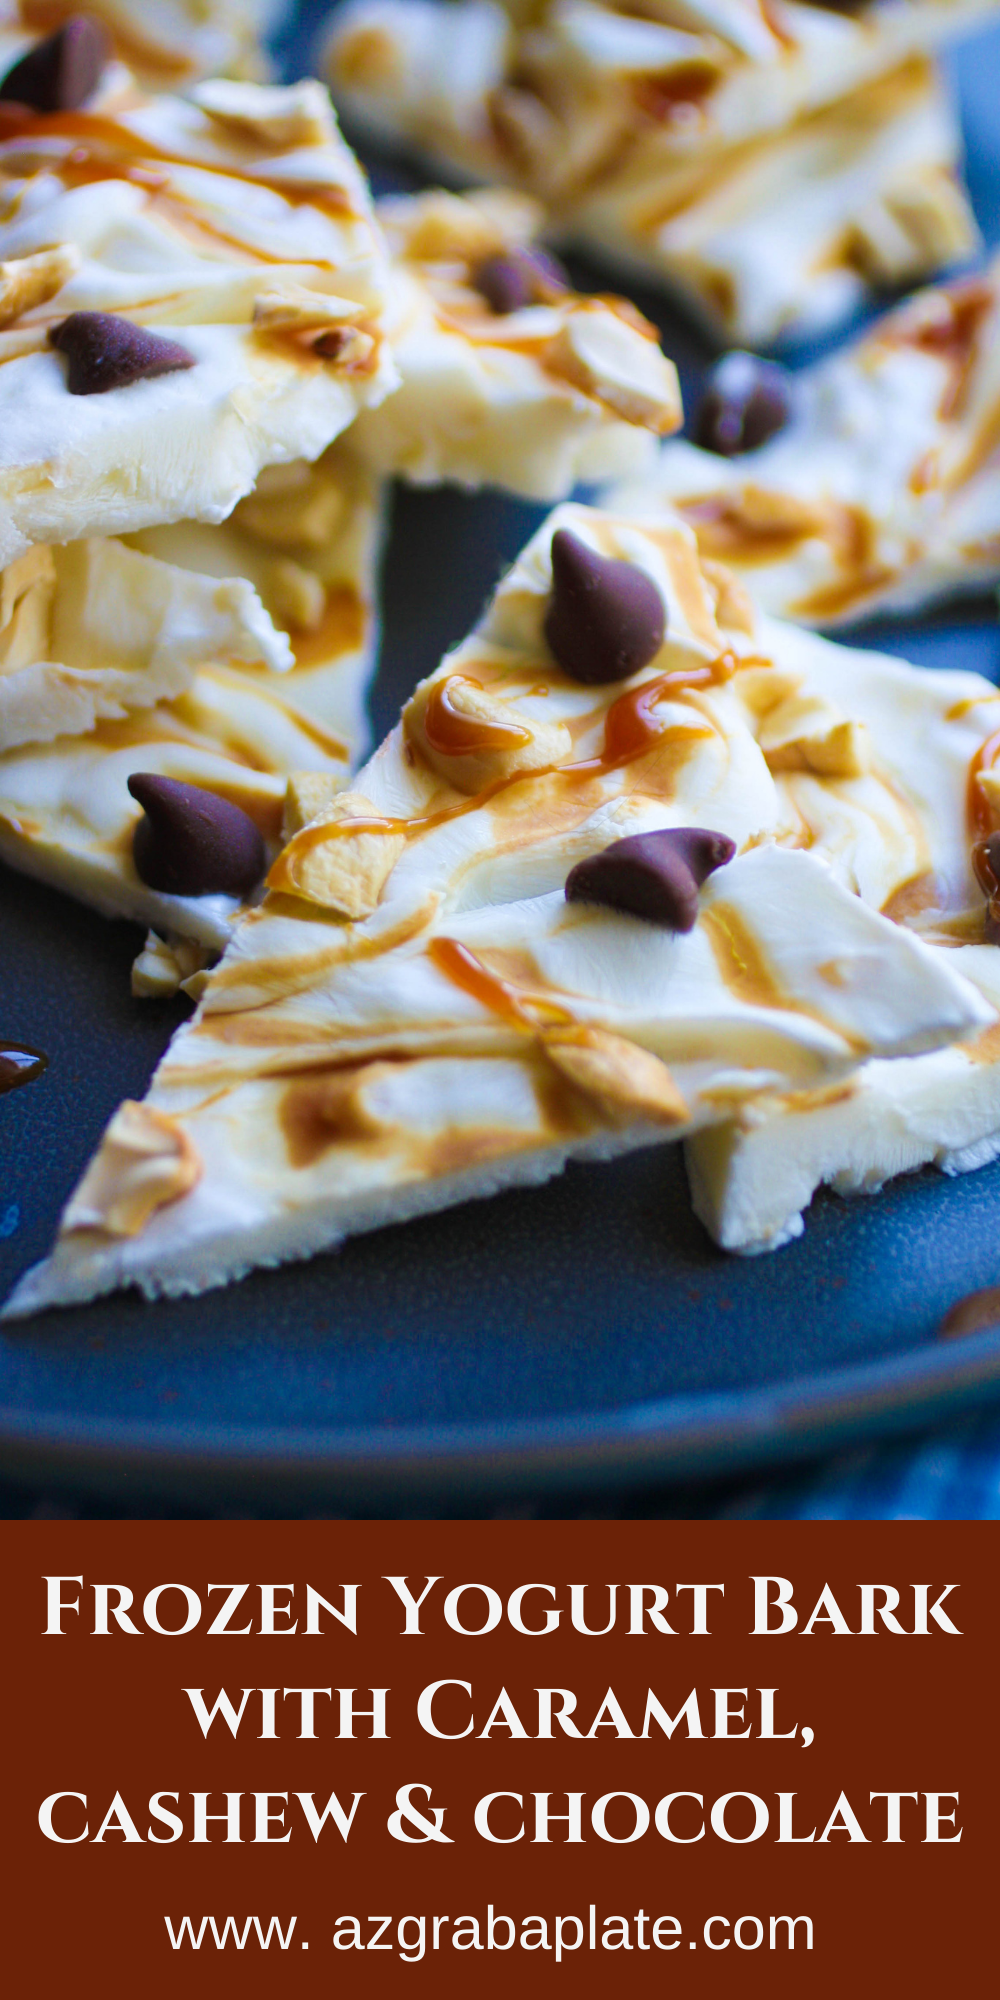 Frozen Yogurt Bark with Caramel, Cashews and Chocolate is a delightful frozen treat for the season!